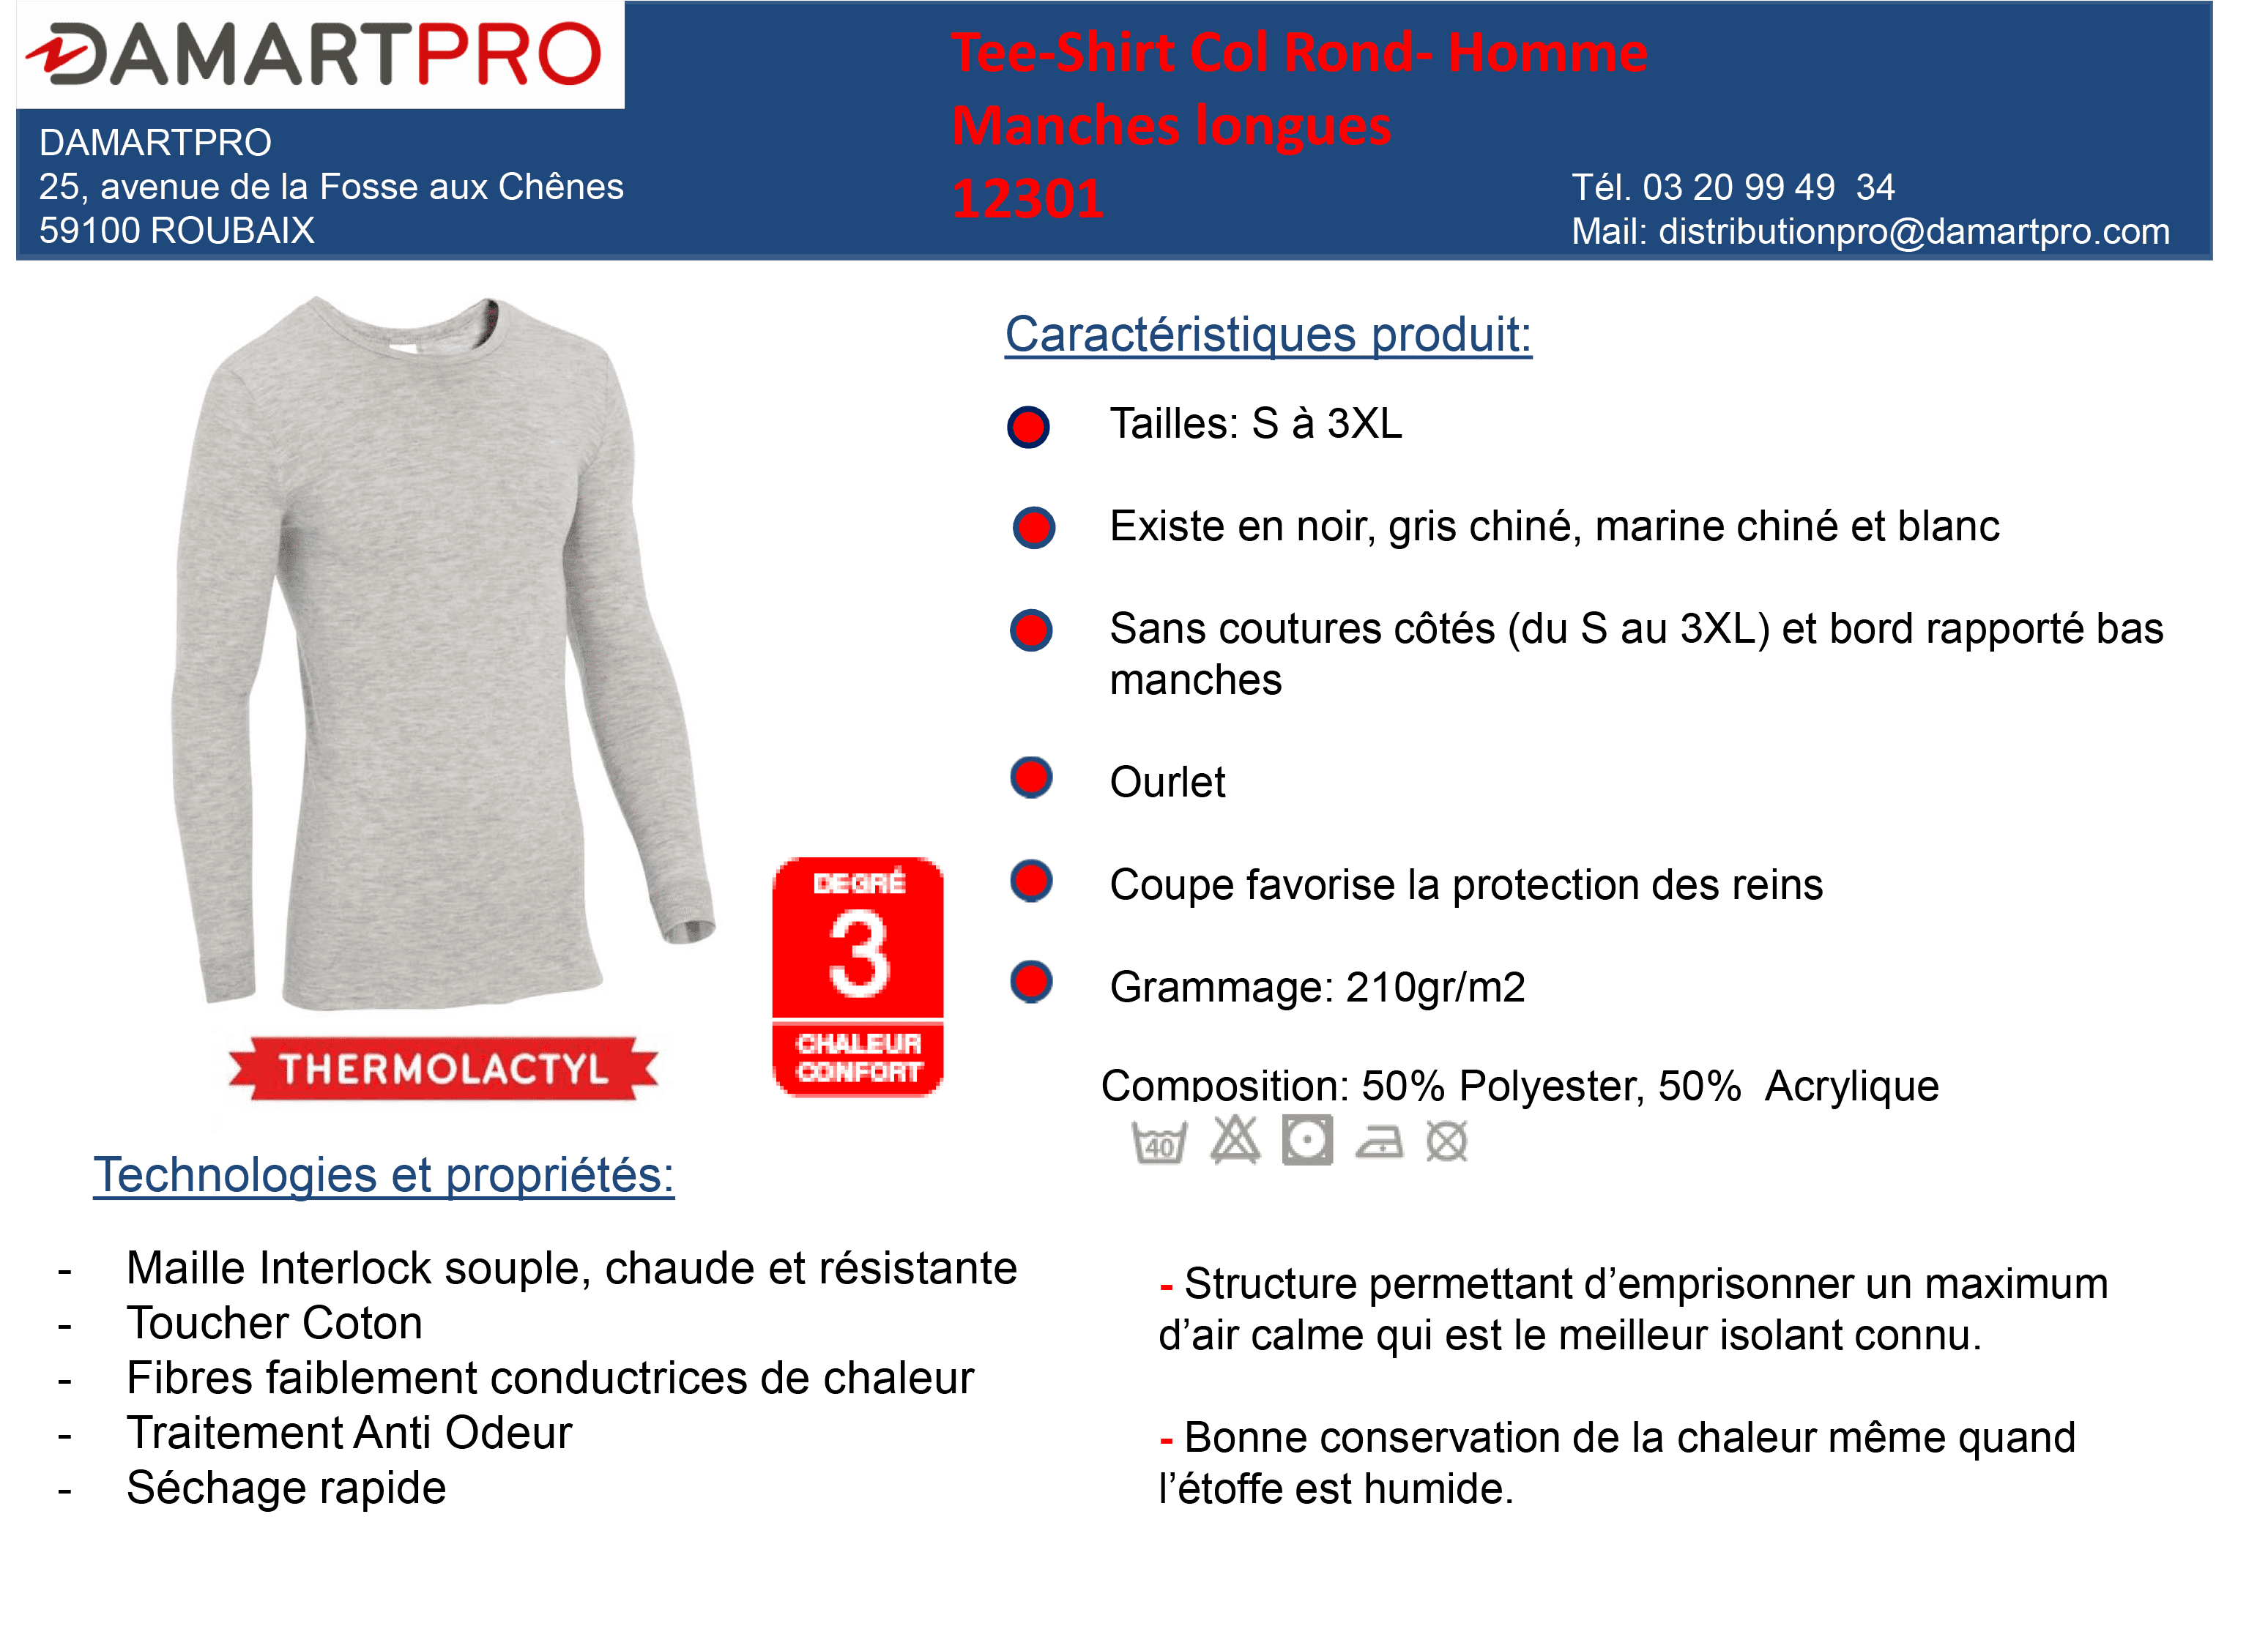 T-Shirt grand froid antistatique Thermolactyl Damart Pro